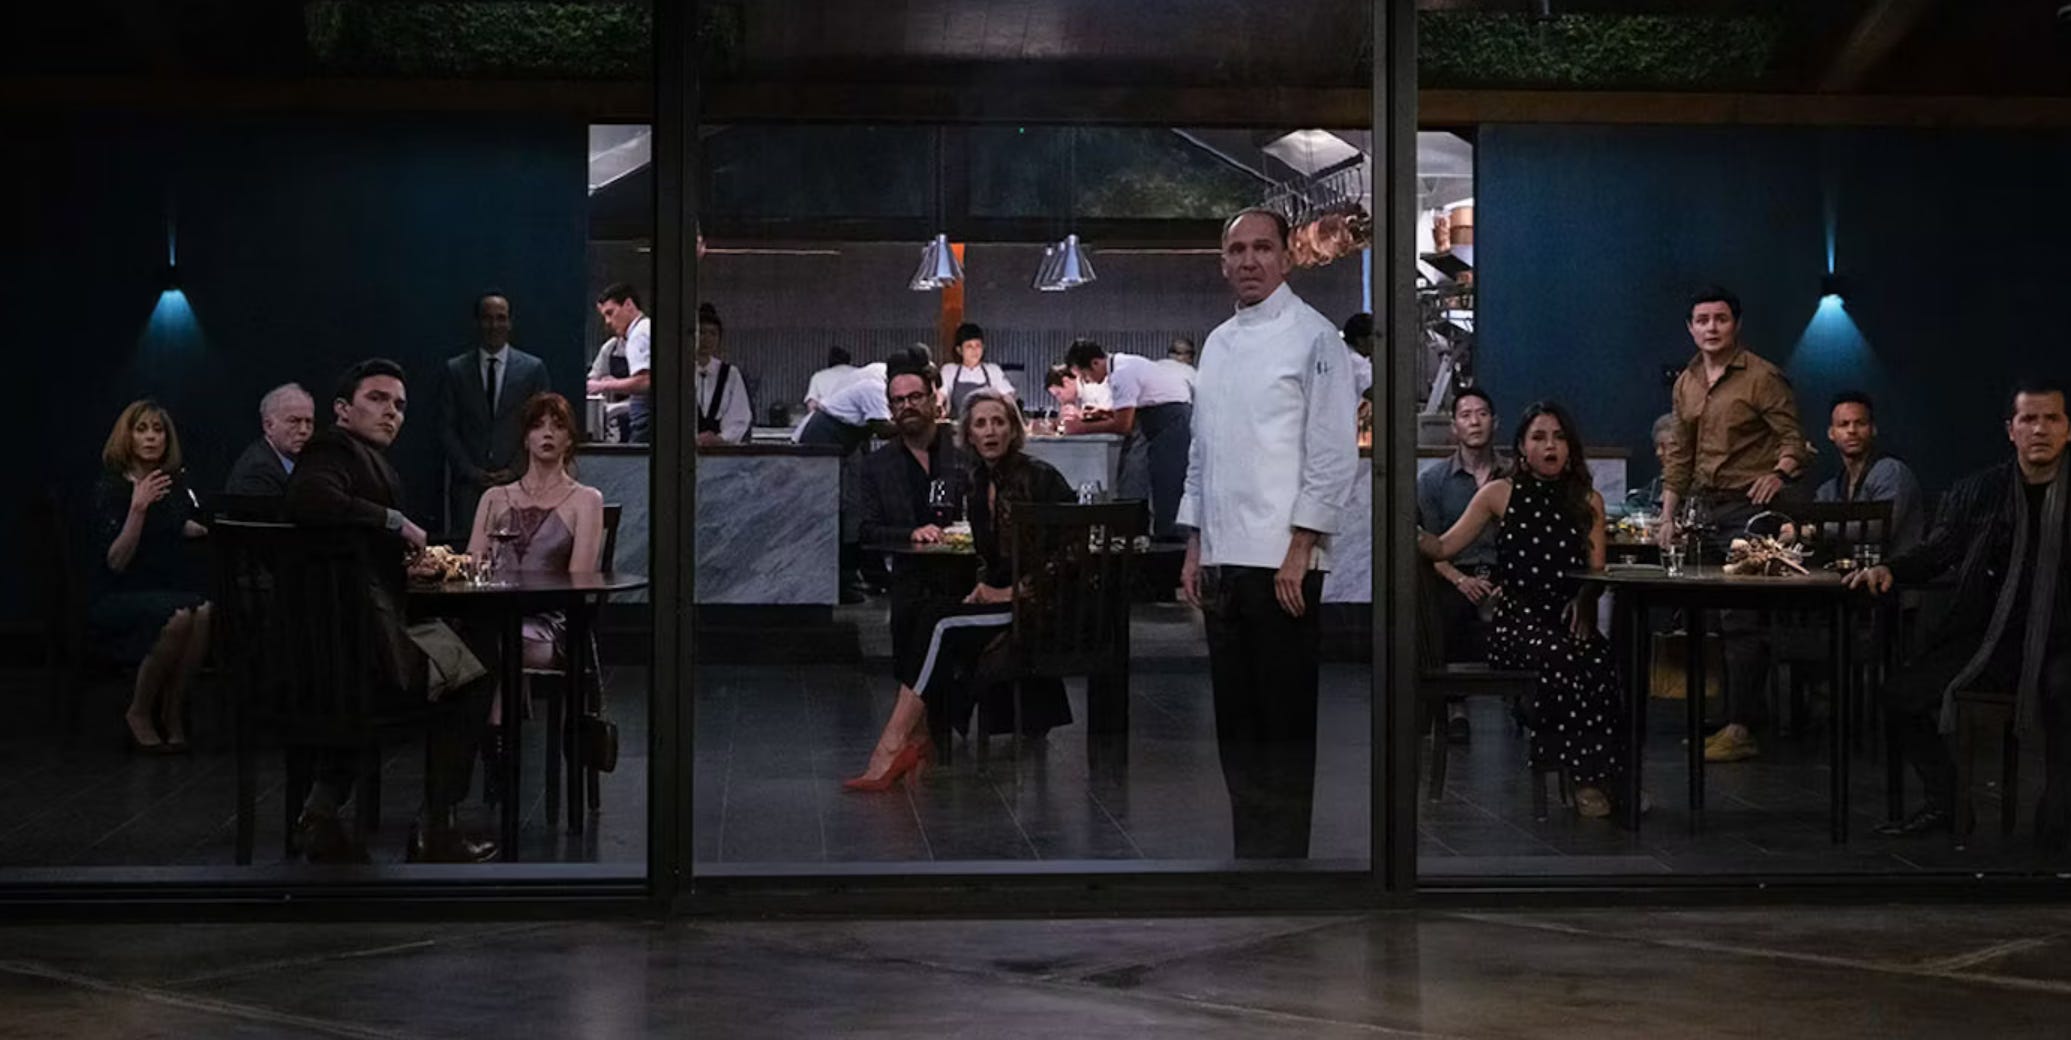 Chef and guests looking shocked by something happening outside